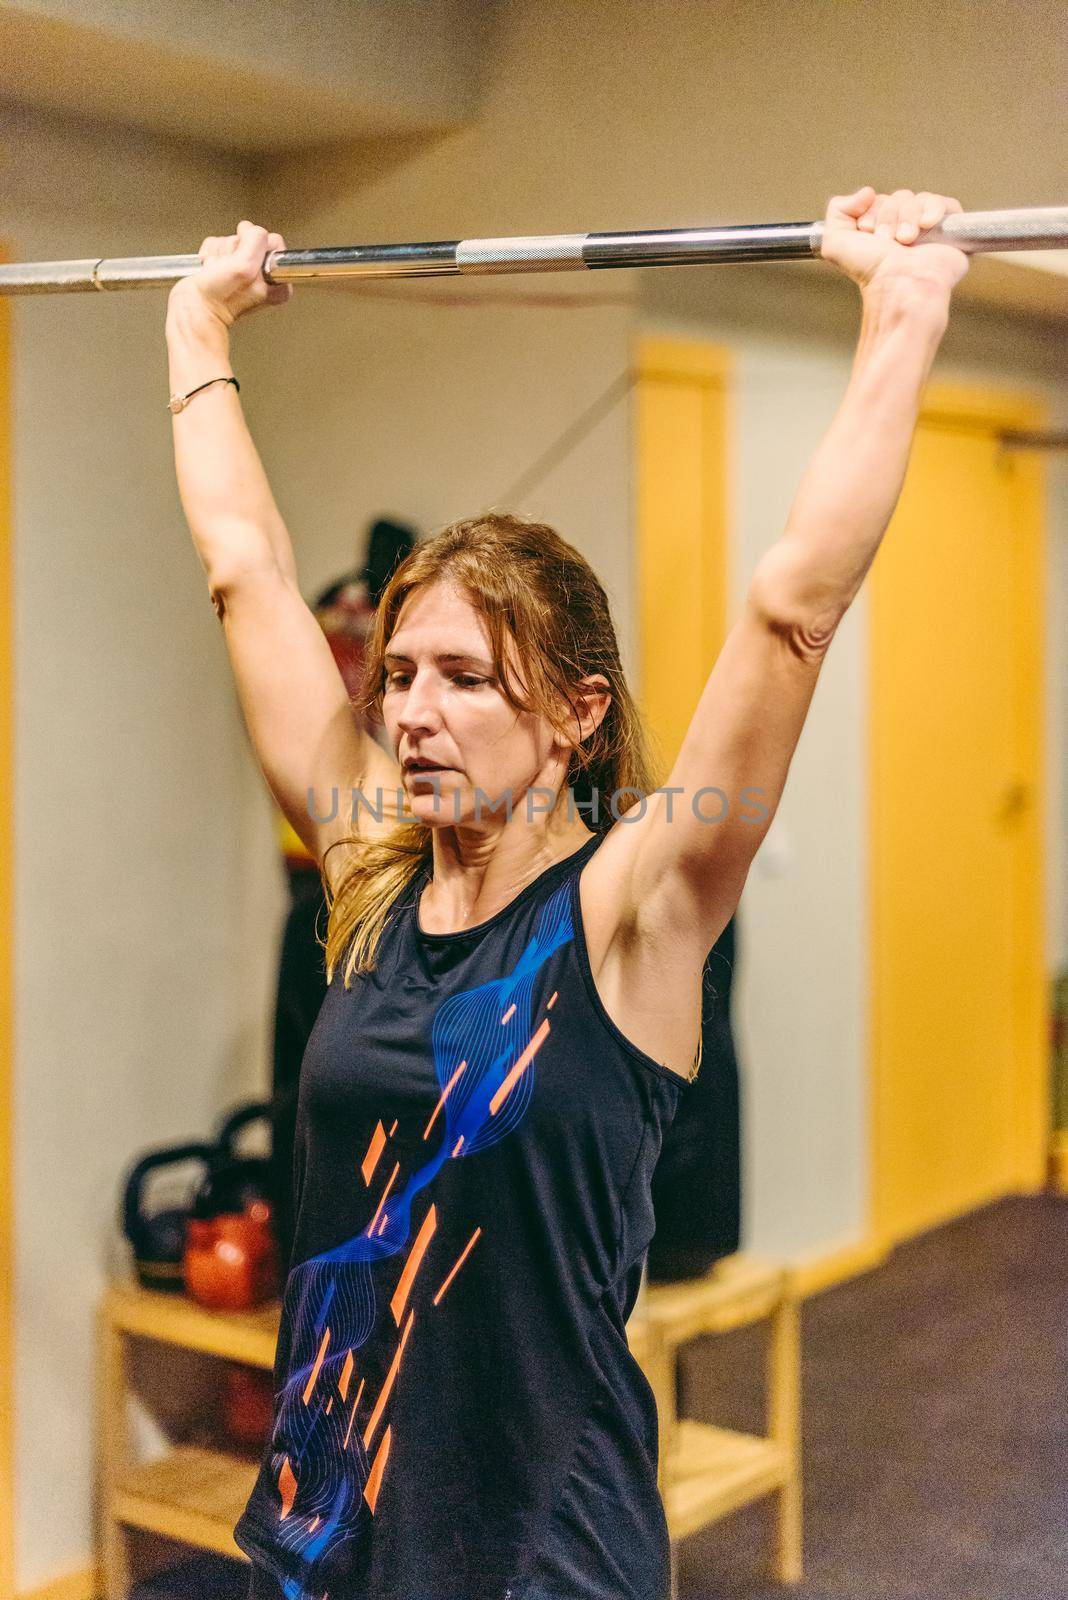 Athlete woman doing press exercise with bar in the gym by ivanmoreno